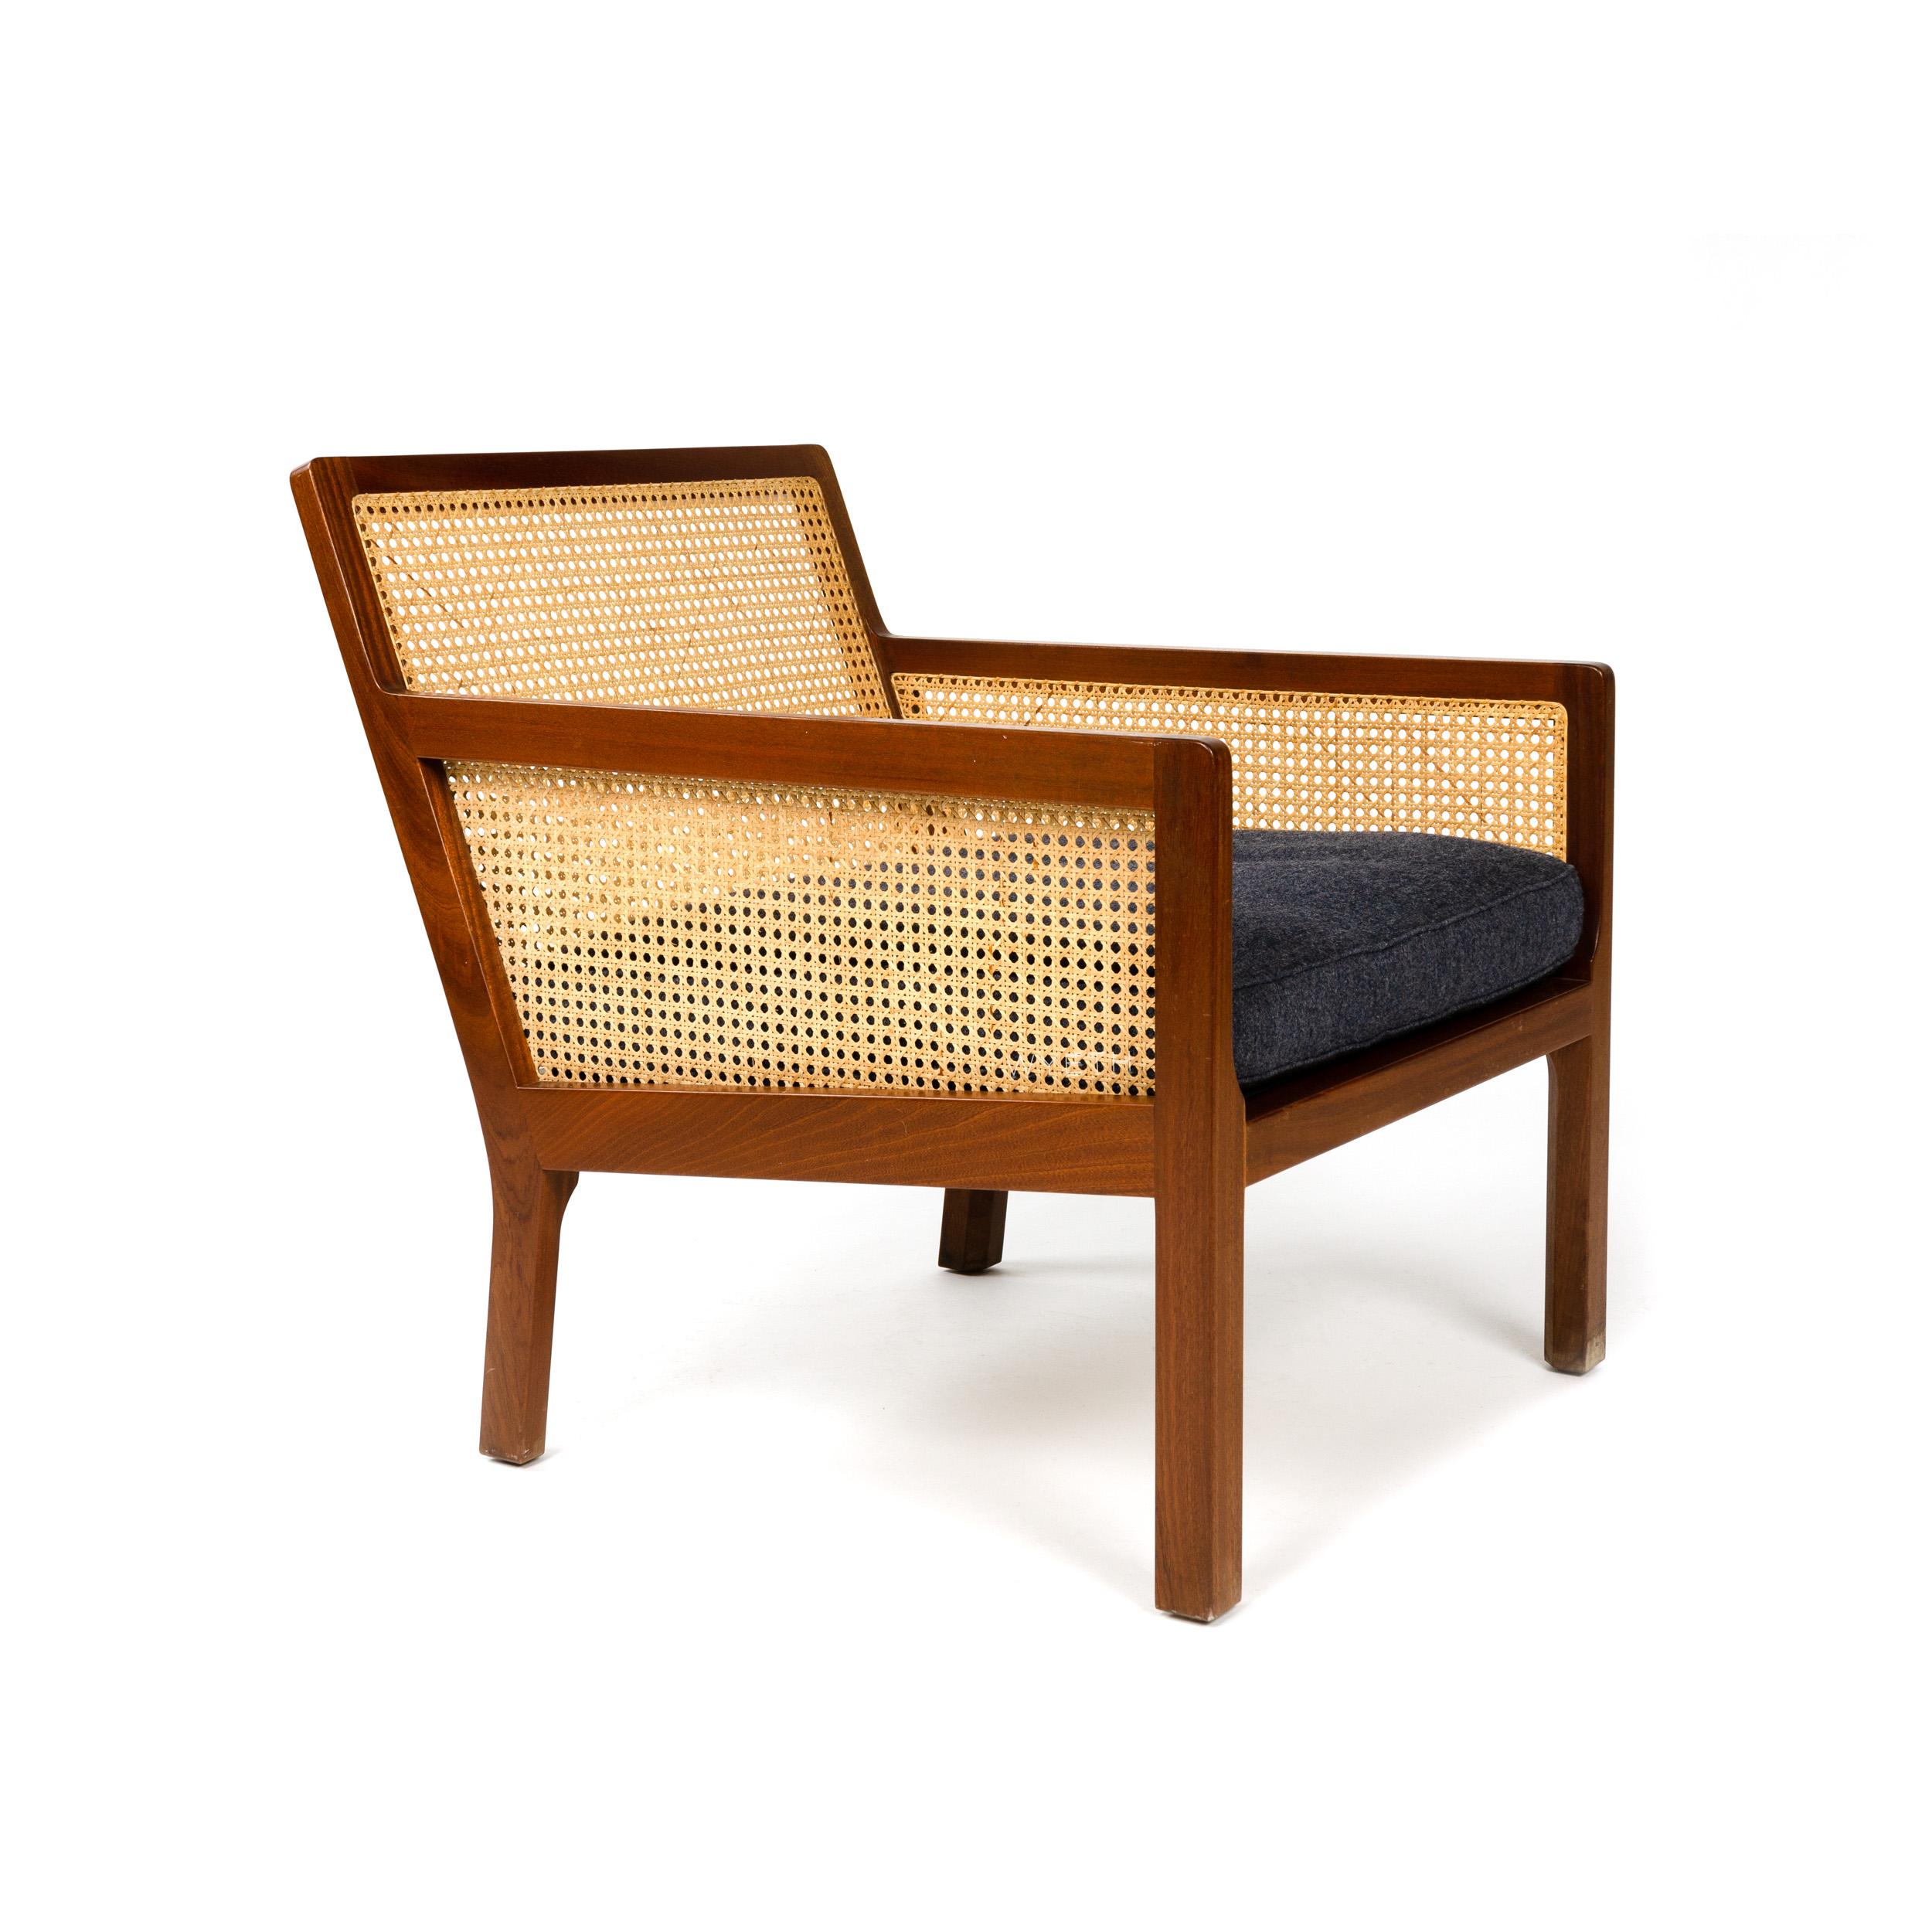 Scandinavian Modern 1960s Mahogany & Cane Lounge Chair by Bernt Petersen for Worts Mobelsnedkeri For Sale